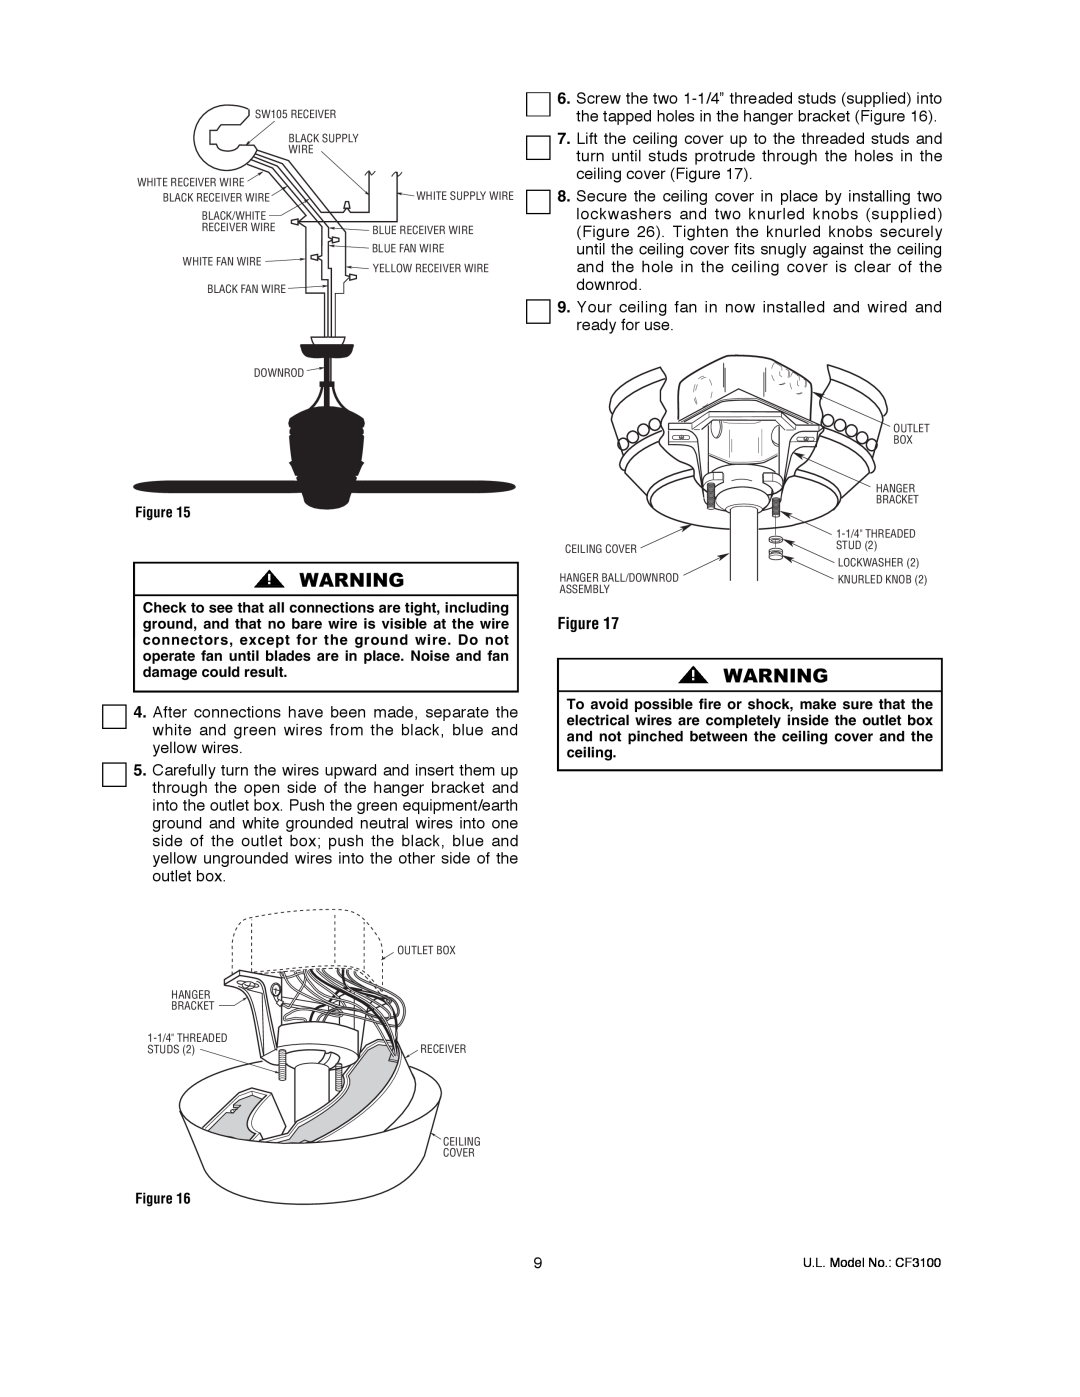 Emerson CF3100AGW00 owner manual Your ceiling fan in now installed and wired and ready for use 